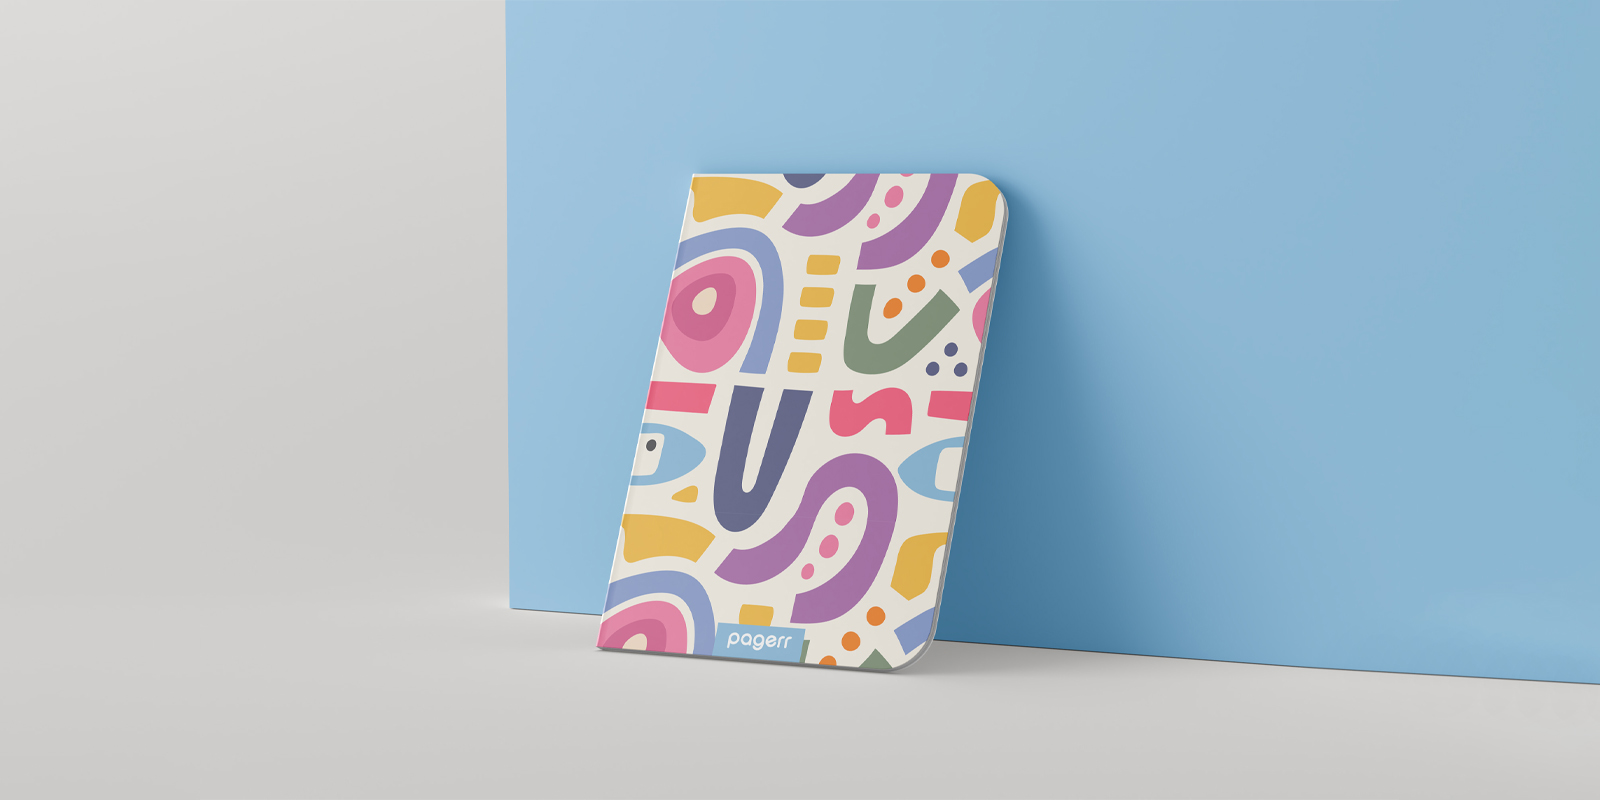 Stapled notebooks in Wollongong - Print with Pagerr